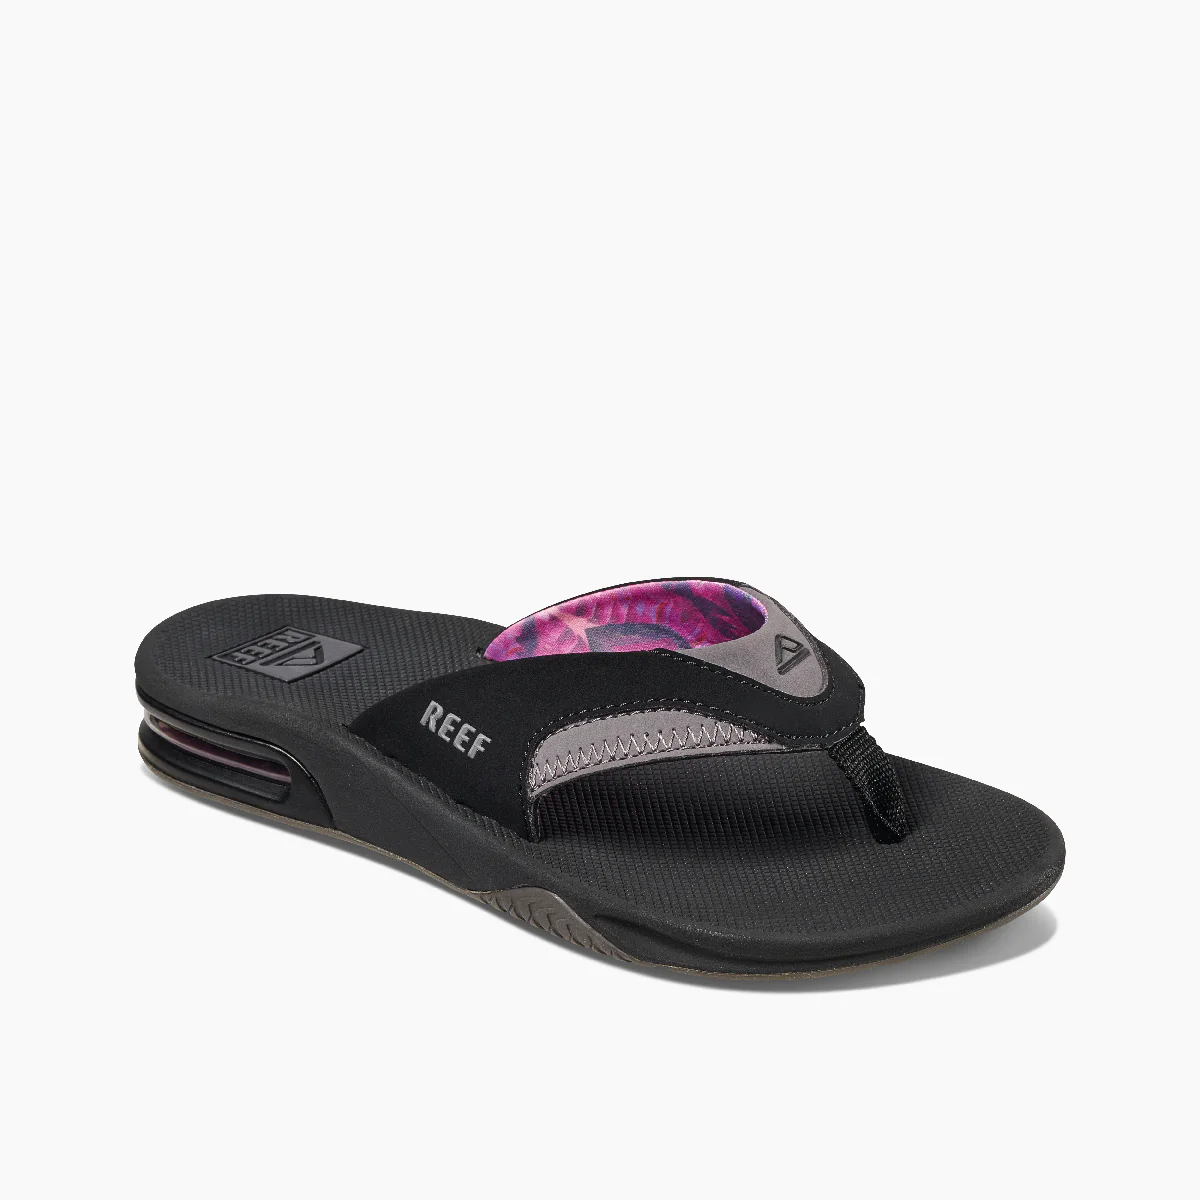 Womens Fanning flip flop sandals in black grey angle view